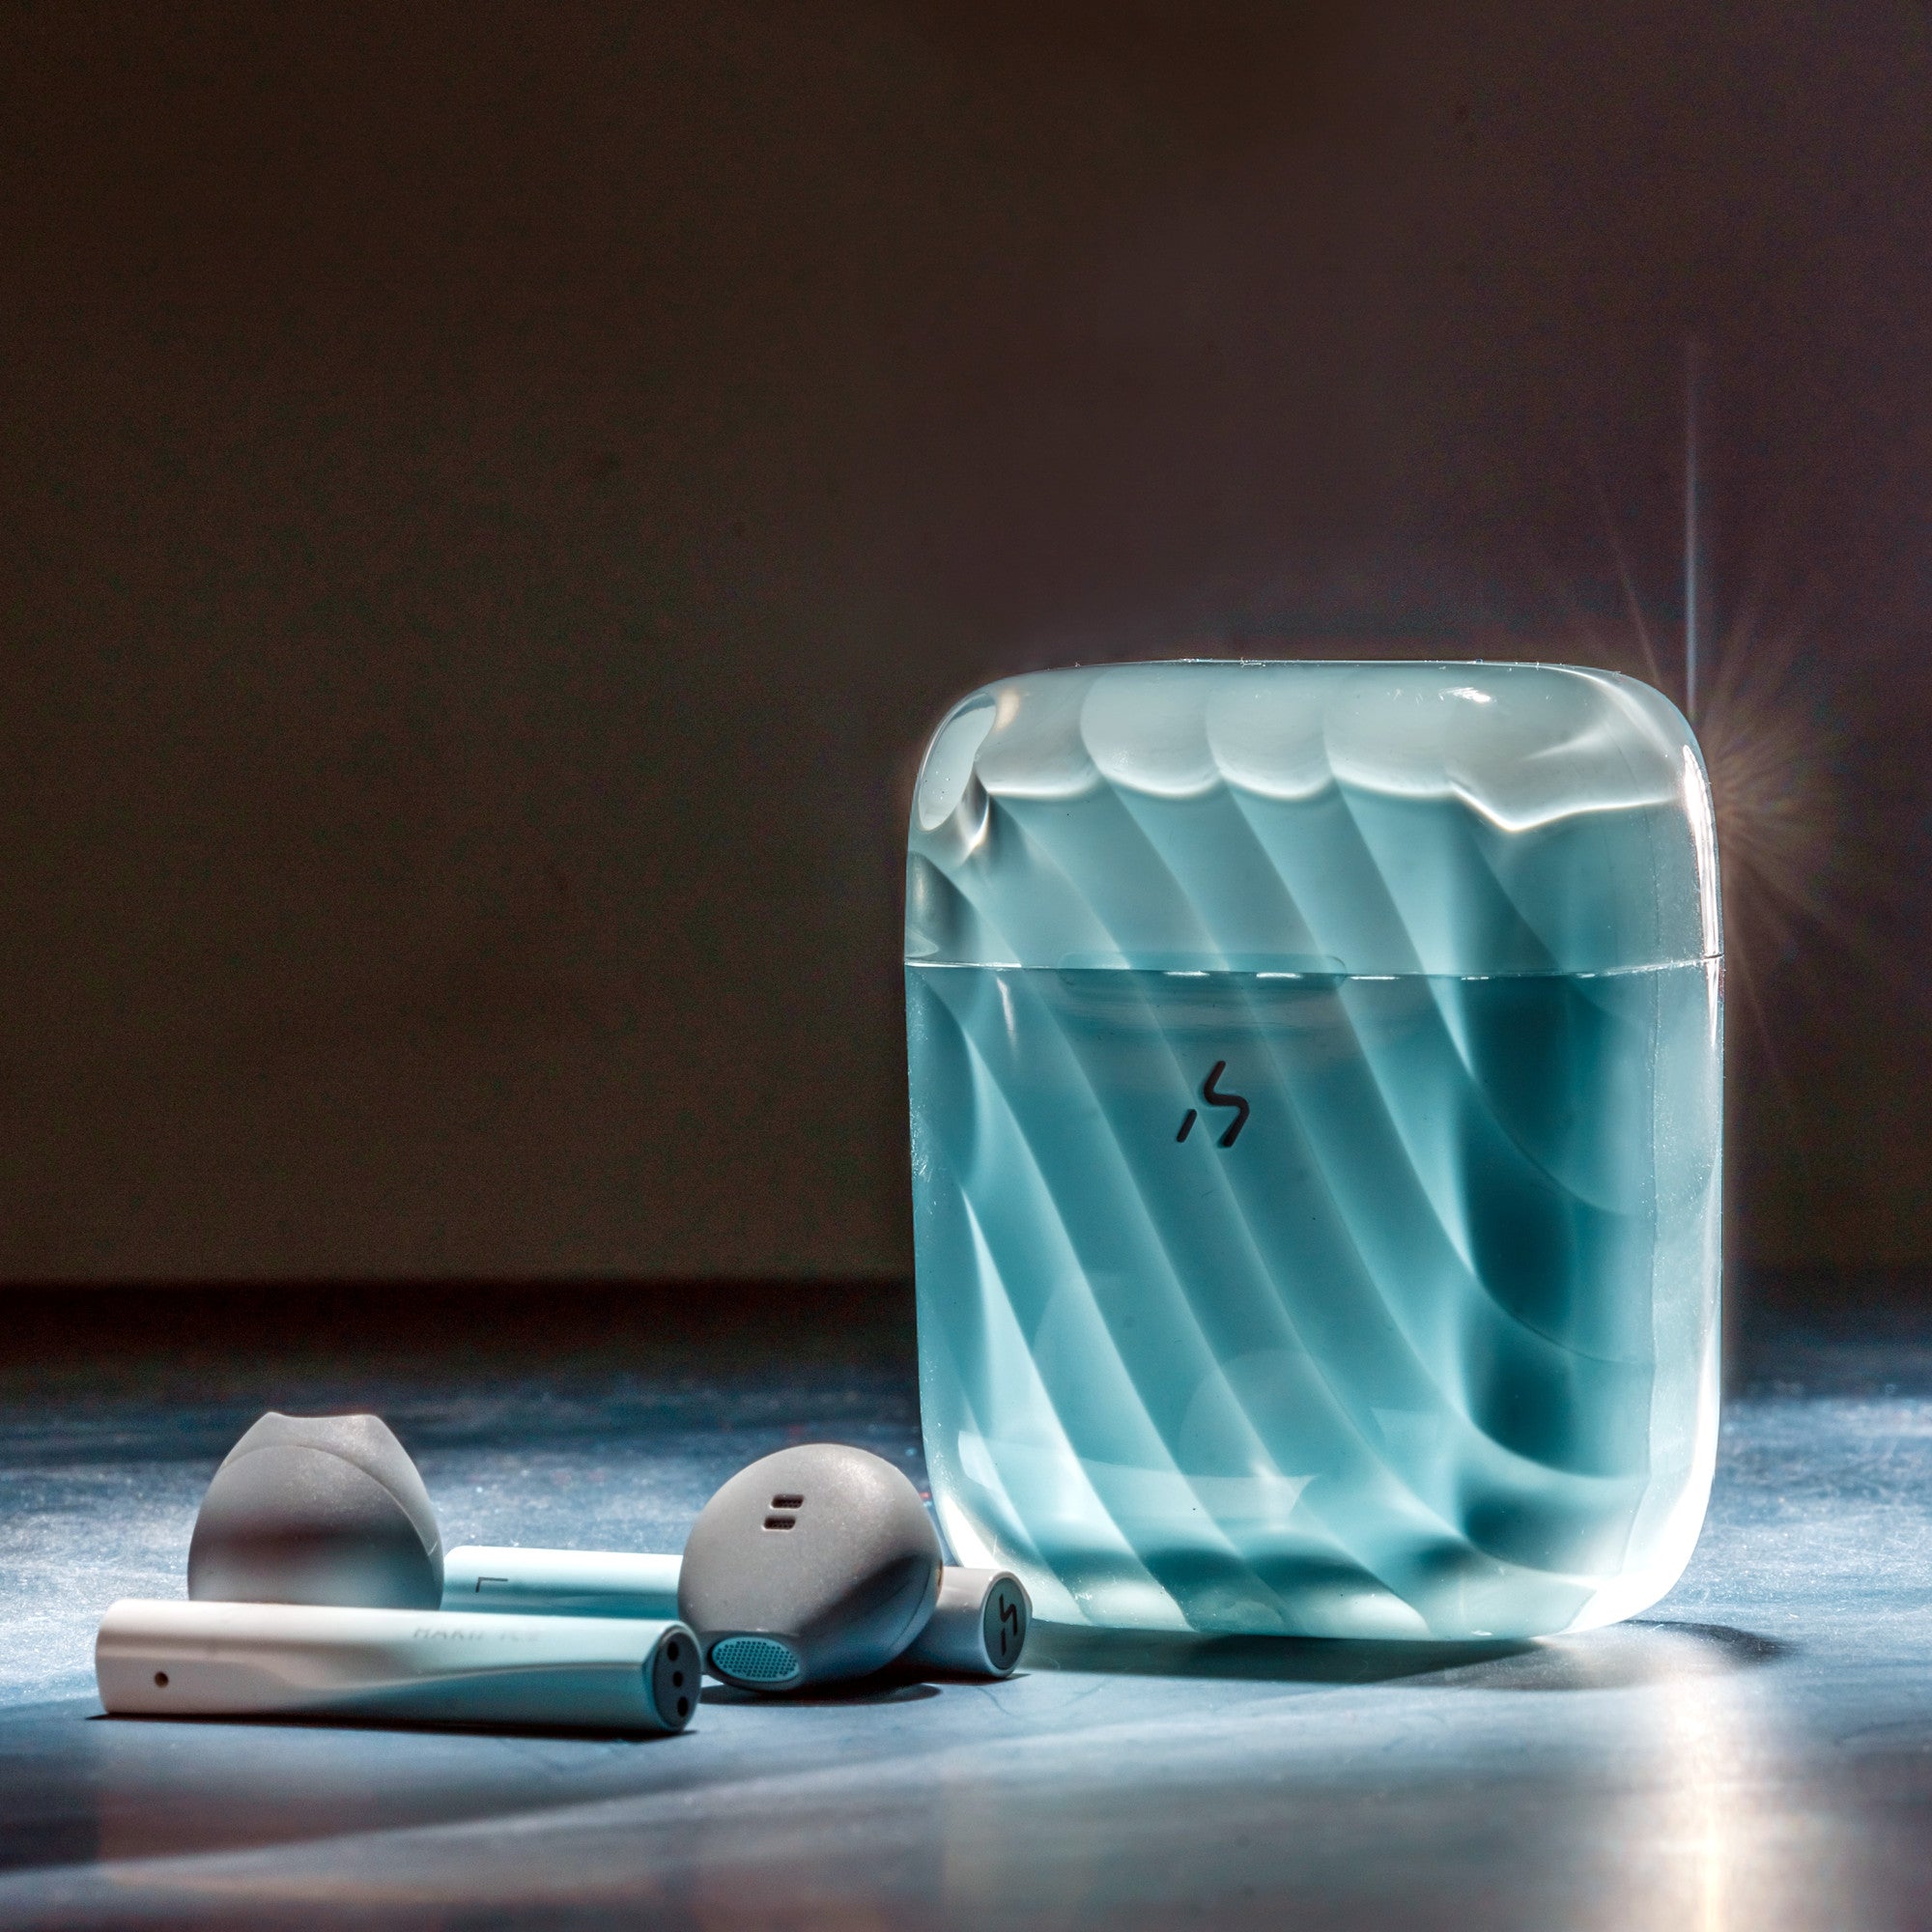 Low Latency Wireless Earbuds for Android & iPhone - HAKII ICE (Blue)